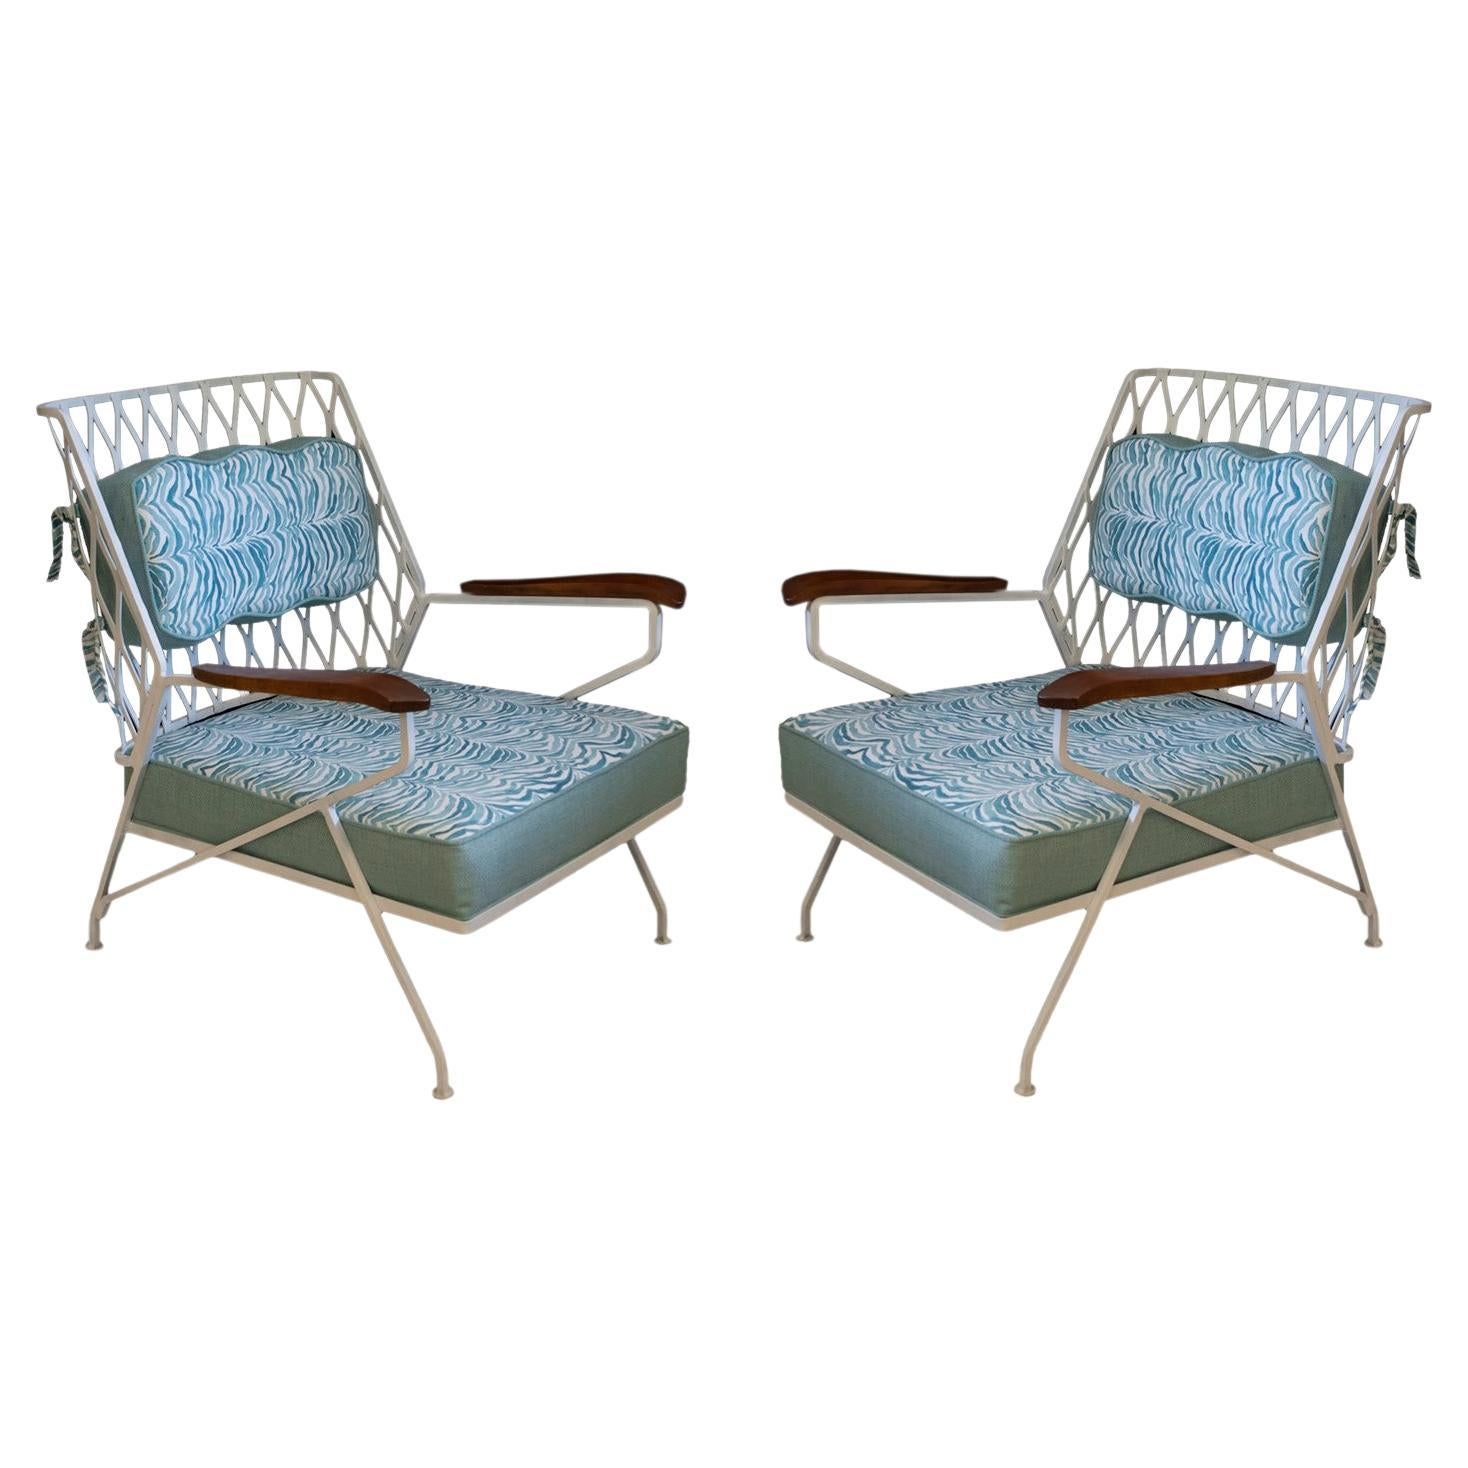 Pair of 1950s Cast Iron Club Chairs by Maurizio Tempestini for Salterini